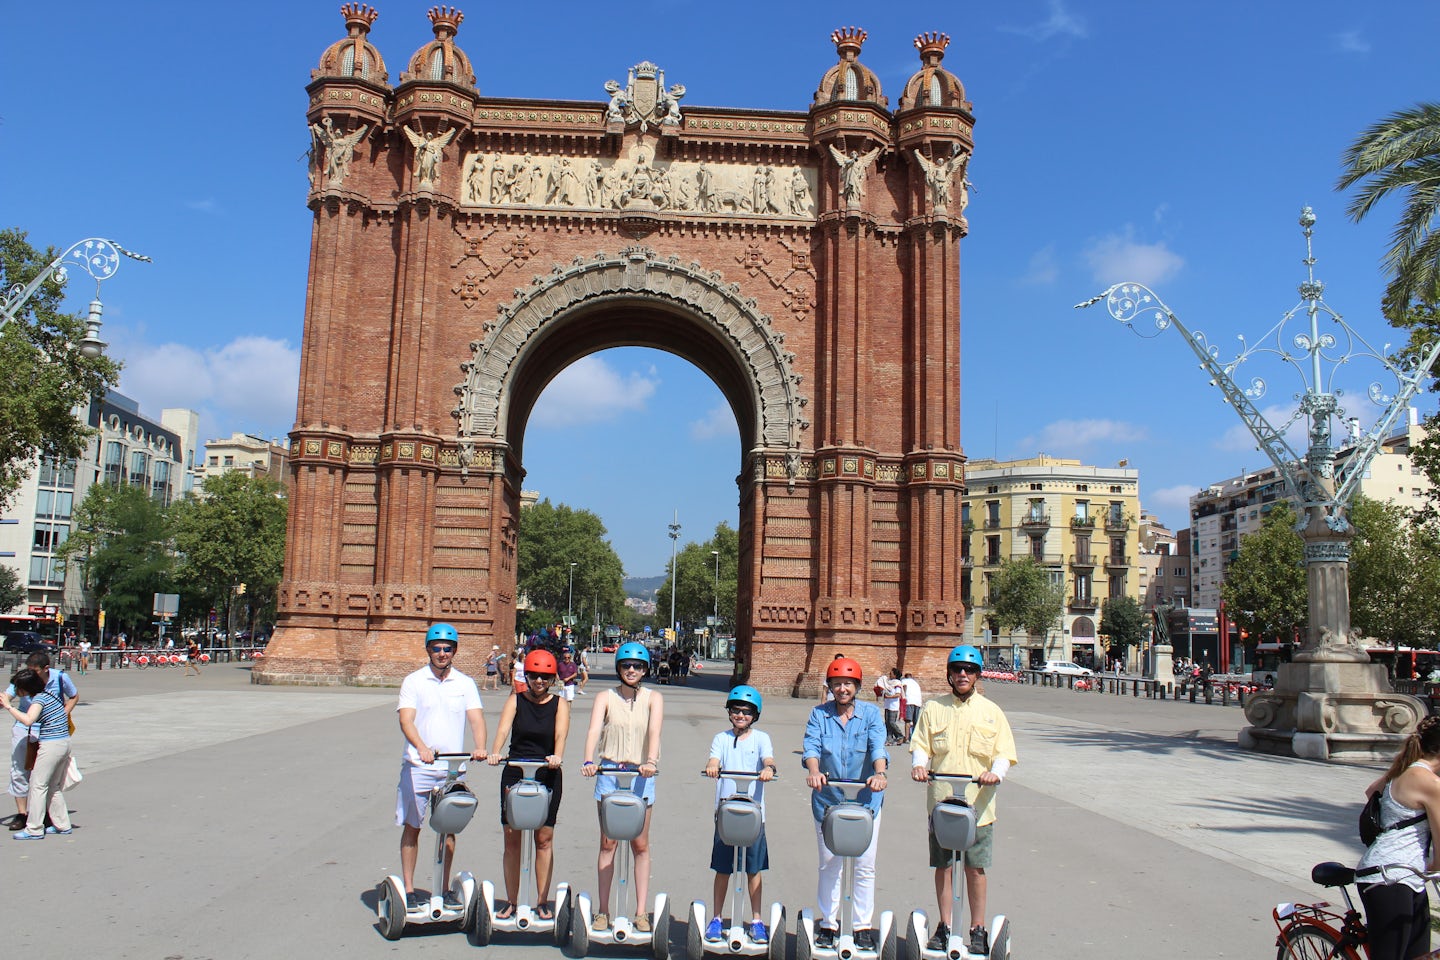 Segway tour of Barcelona, highly recommend